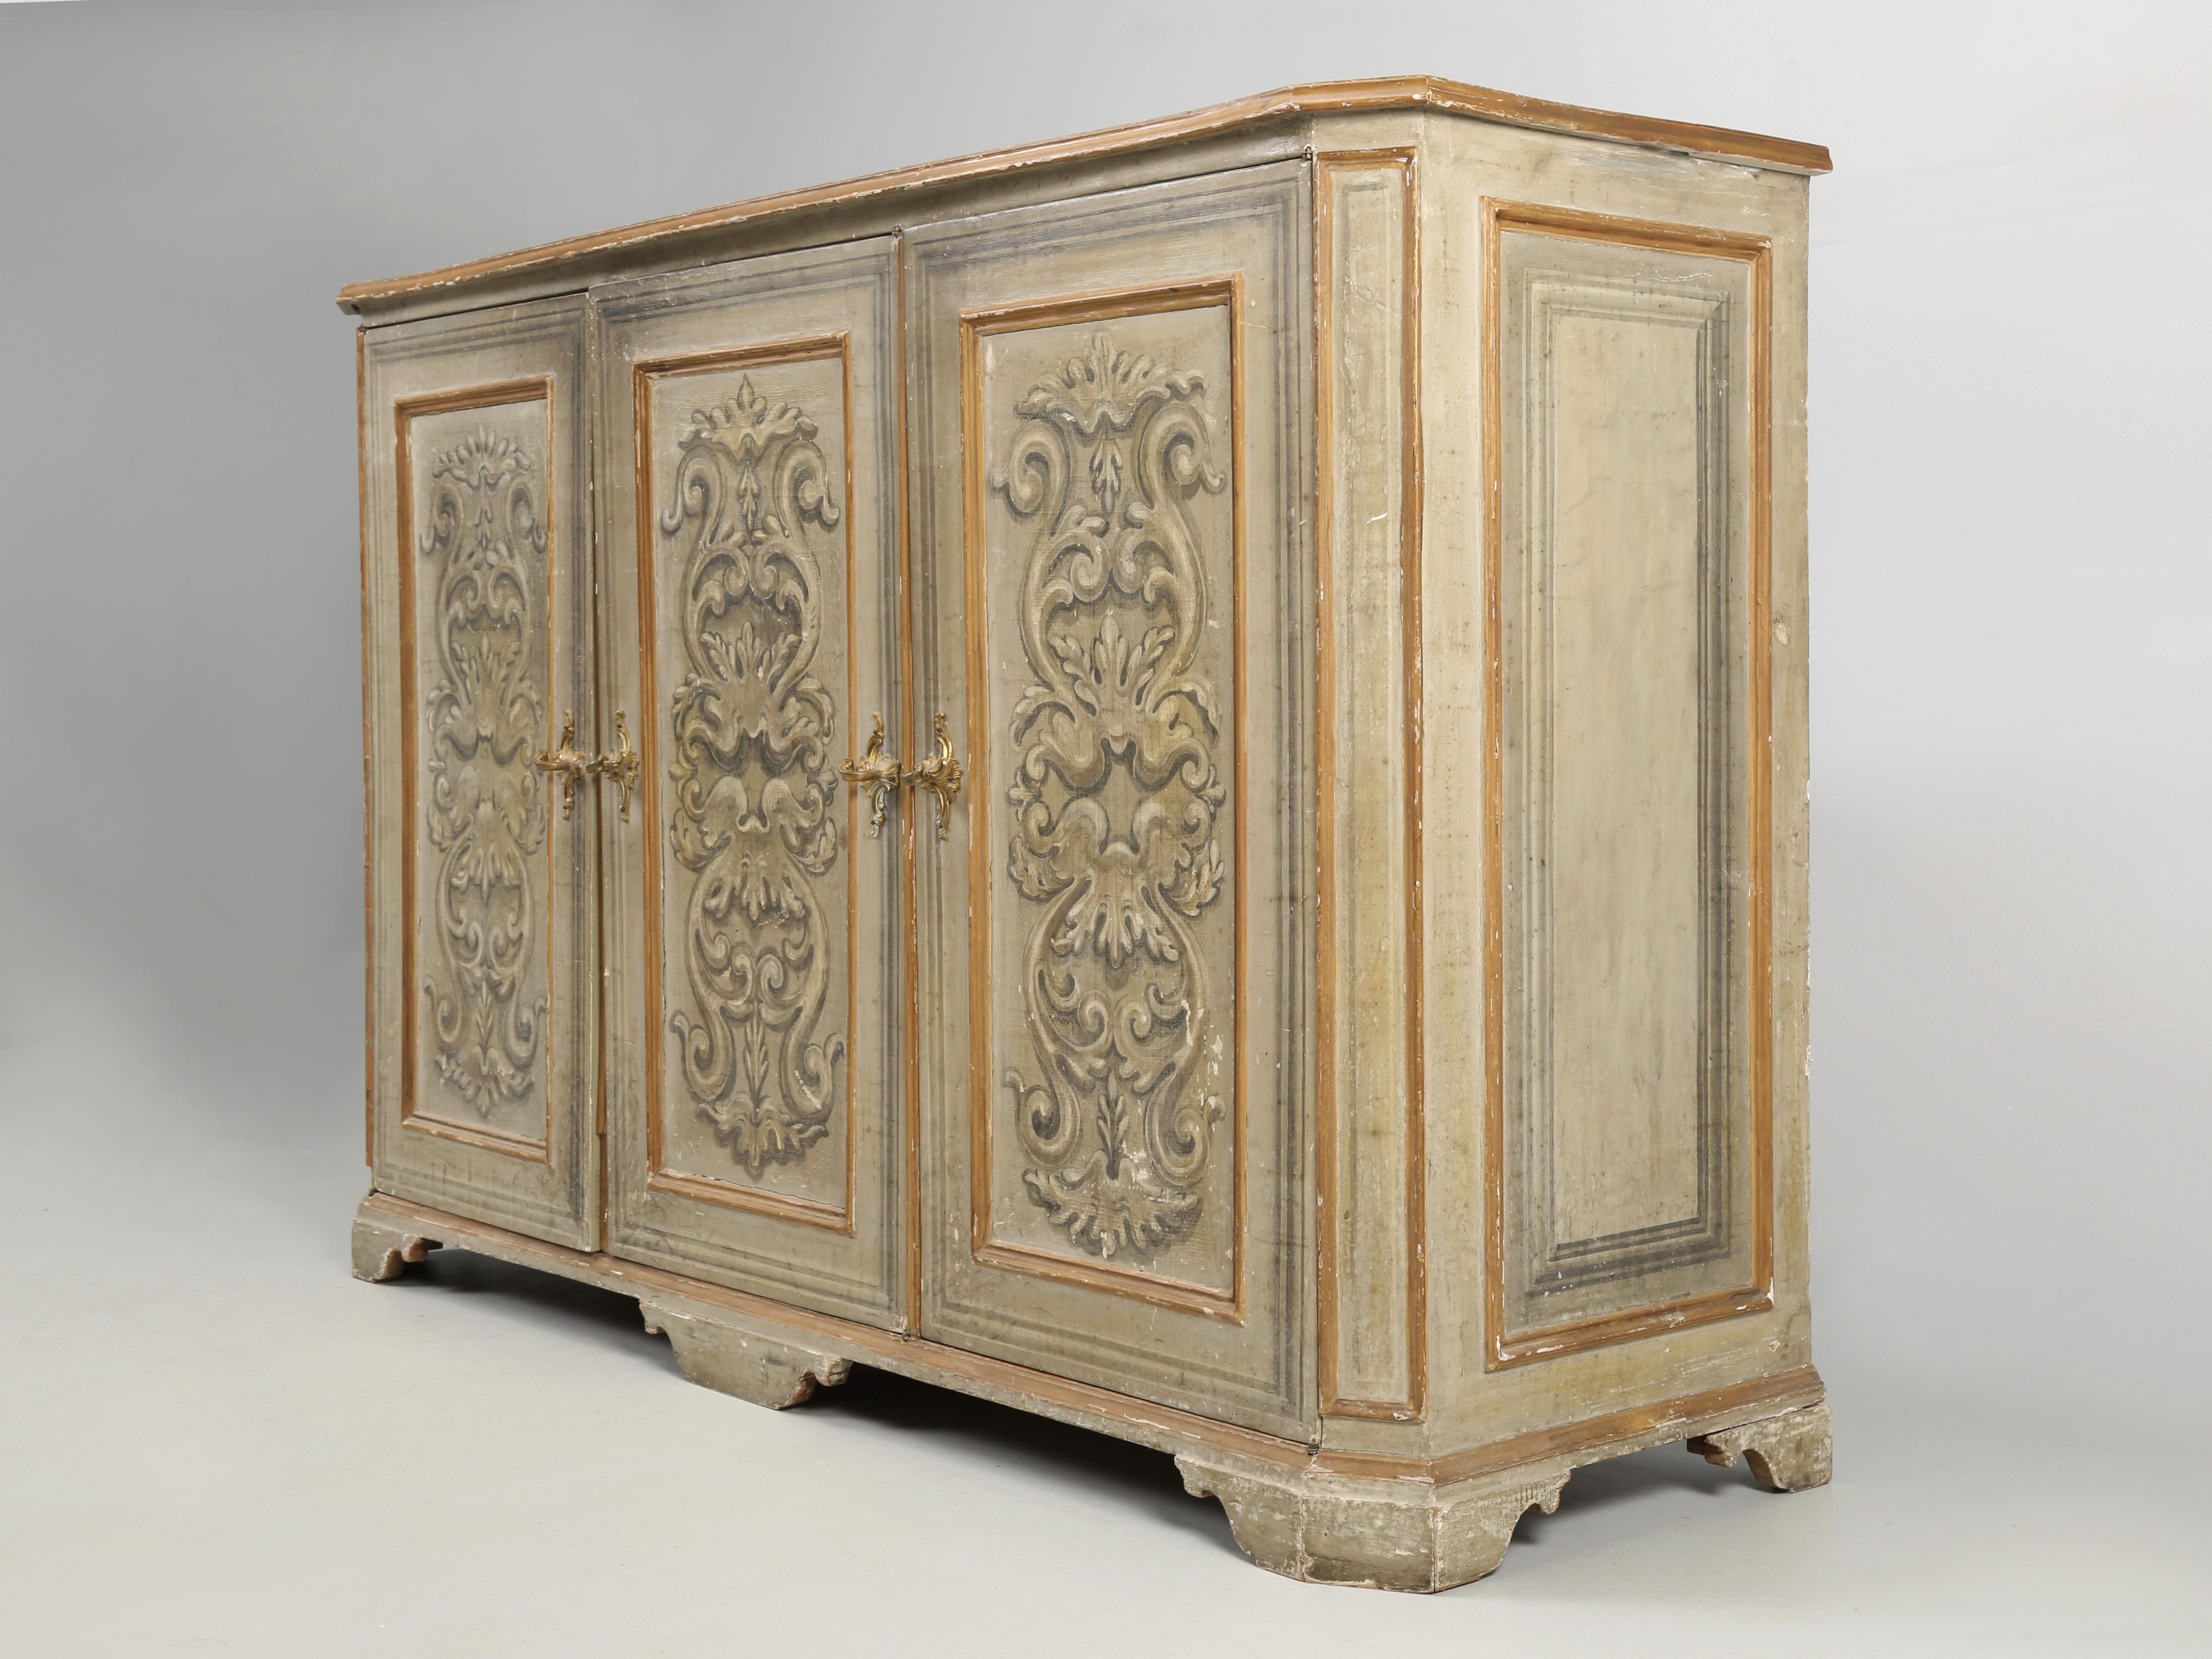 Antique Italian 3-door painted buffet in virtually a completely unrestored condition. The original paint has an unbelievable patina and there appears to be very little touchup. Judging by the backside of the antique Italian buffet, it appears to